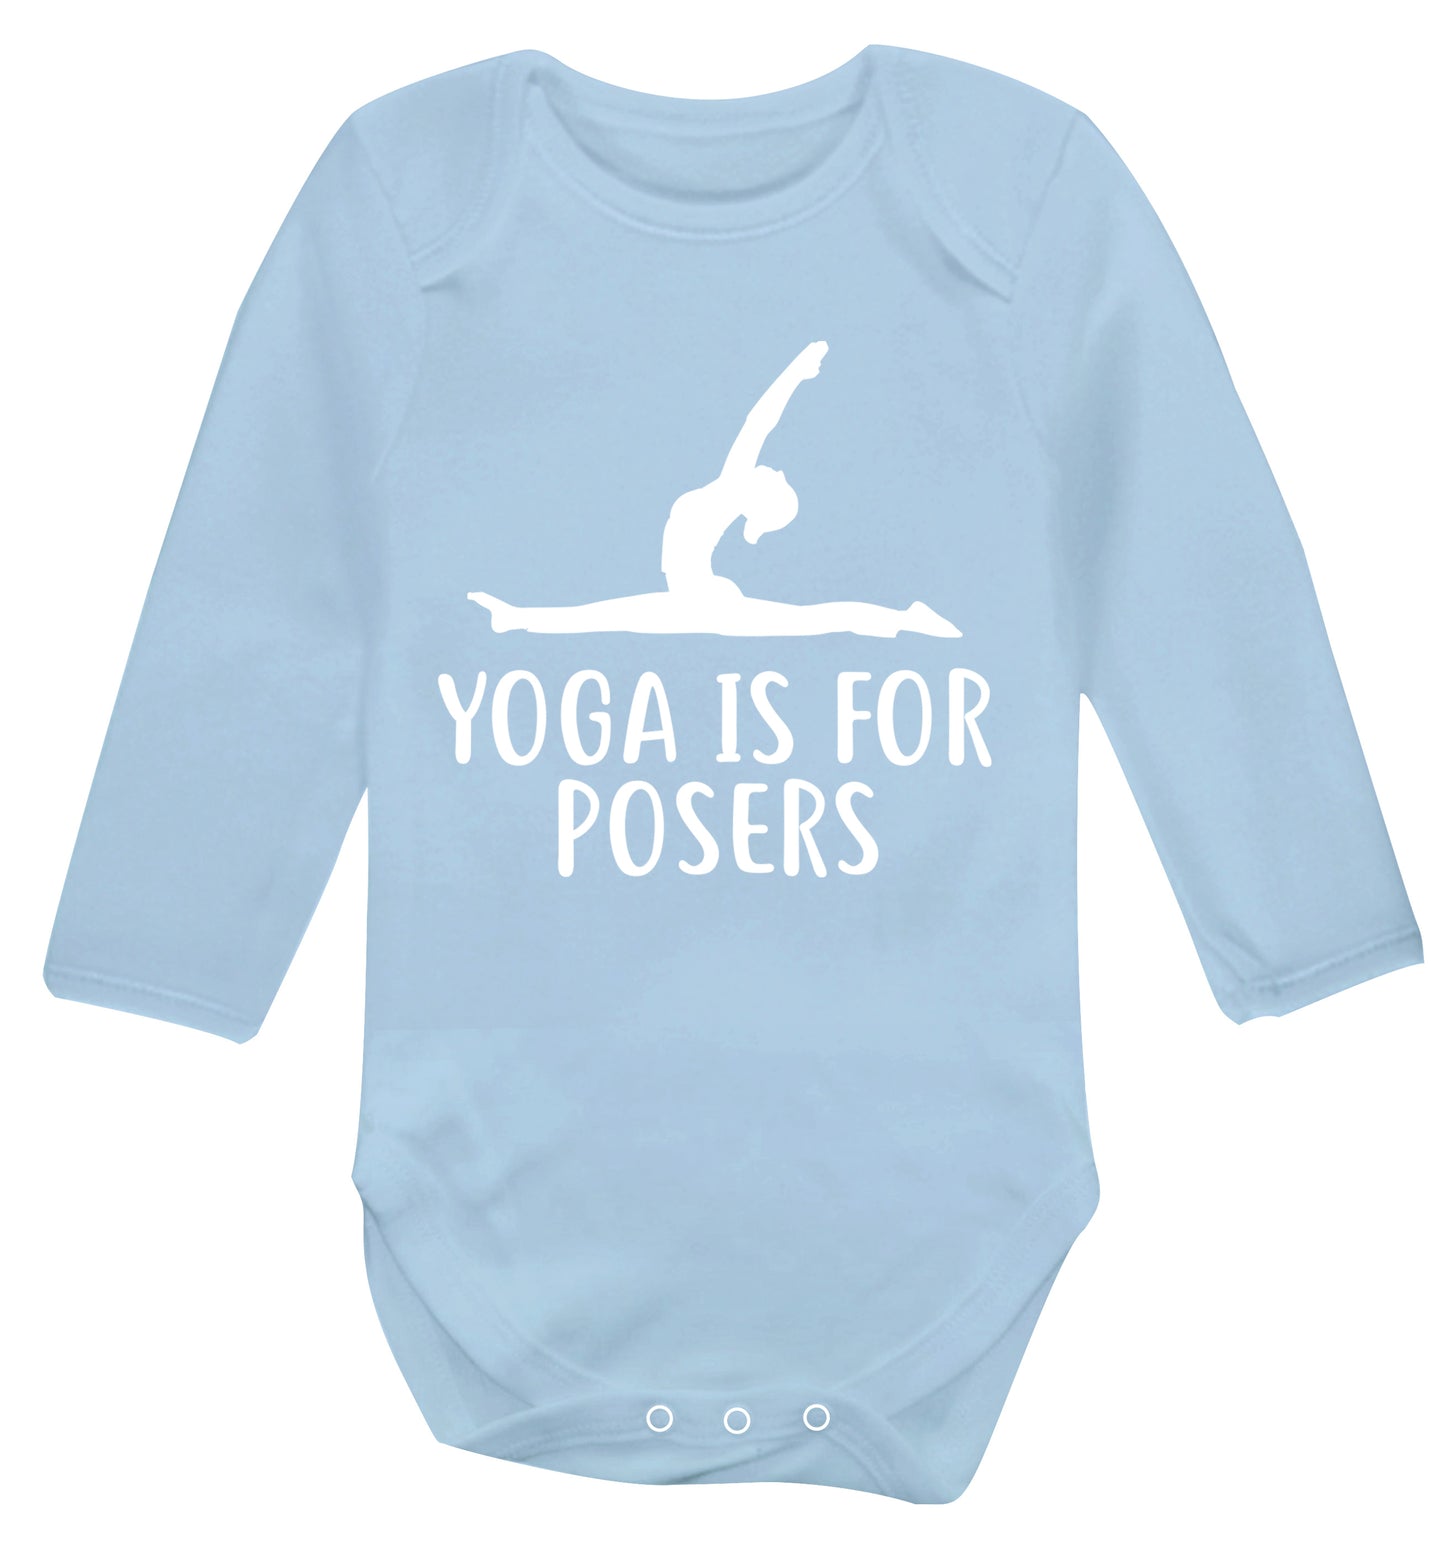 Yoga is for posers Baby Vest long sleeved pale blue 6-12 months